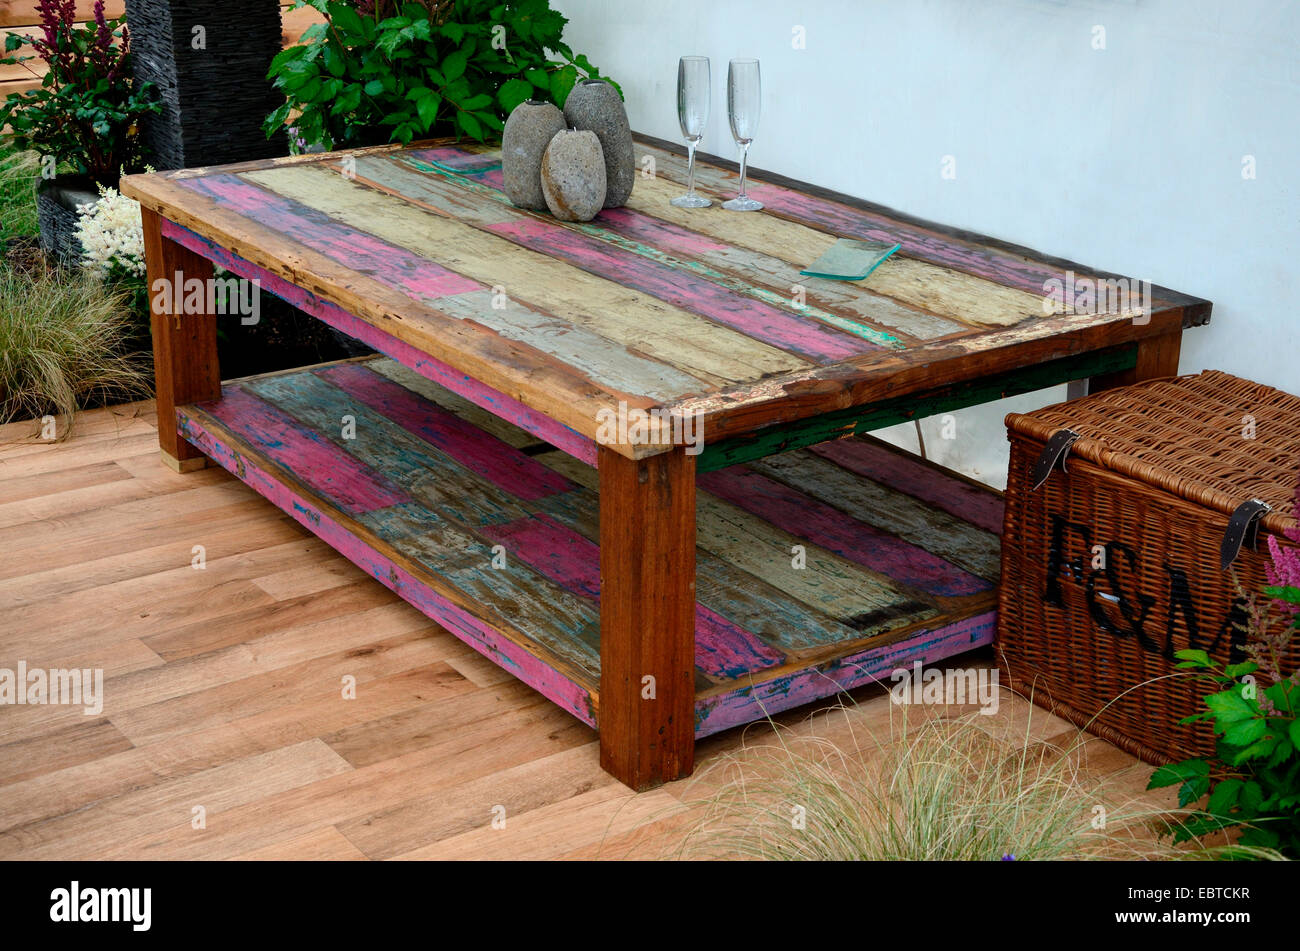 A large coffee table stained and made from reclaimed timber with accessories Stock Photo